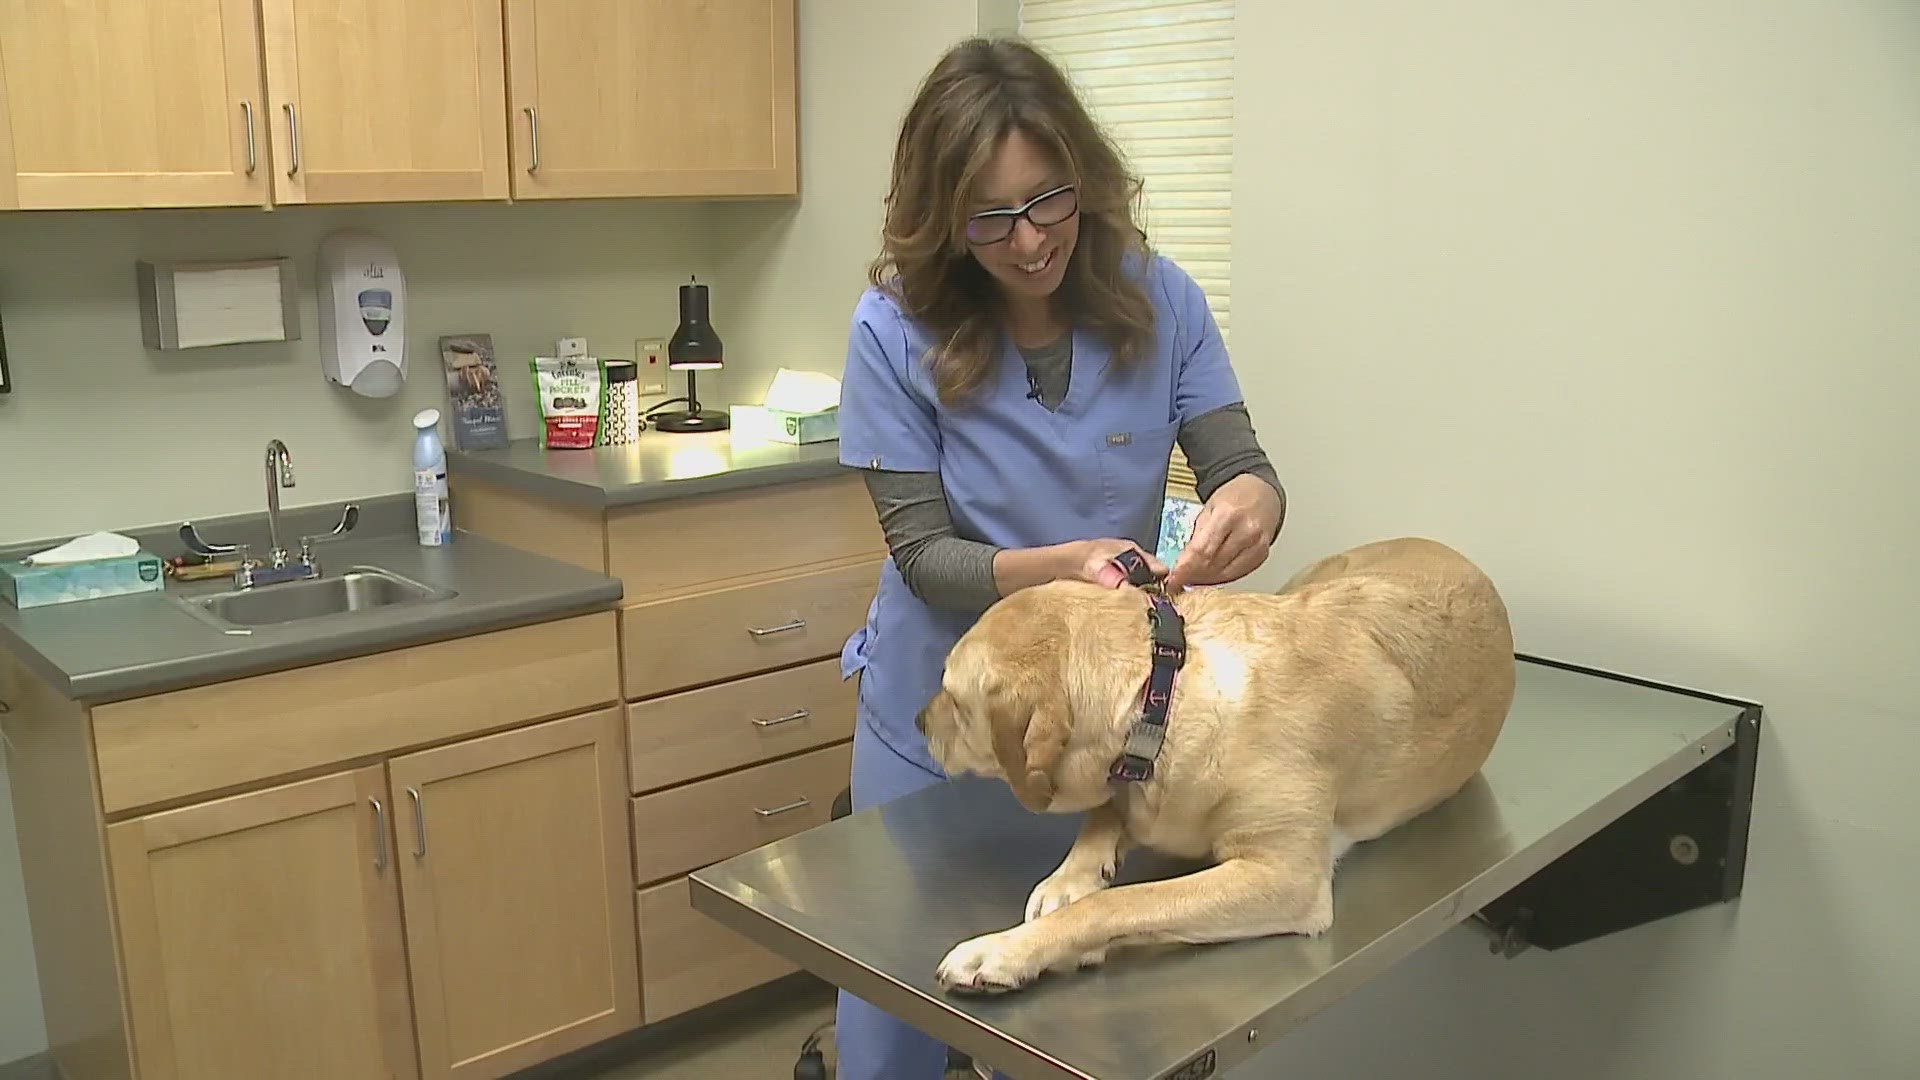 Lyme, anaplasmosis, and Rocky Mountain Spotted Fever are increasing among dogs.